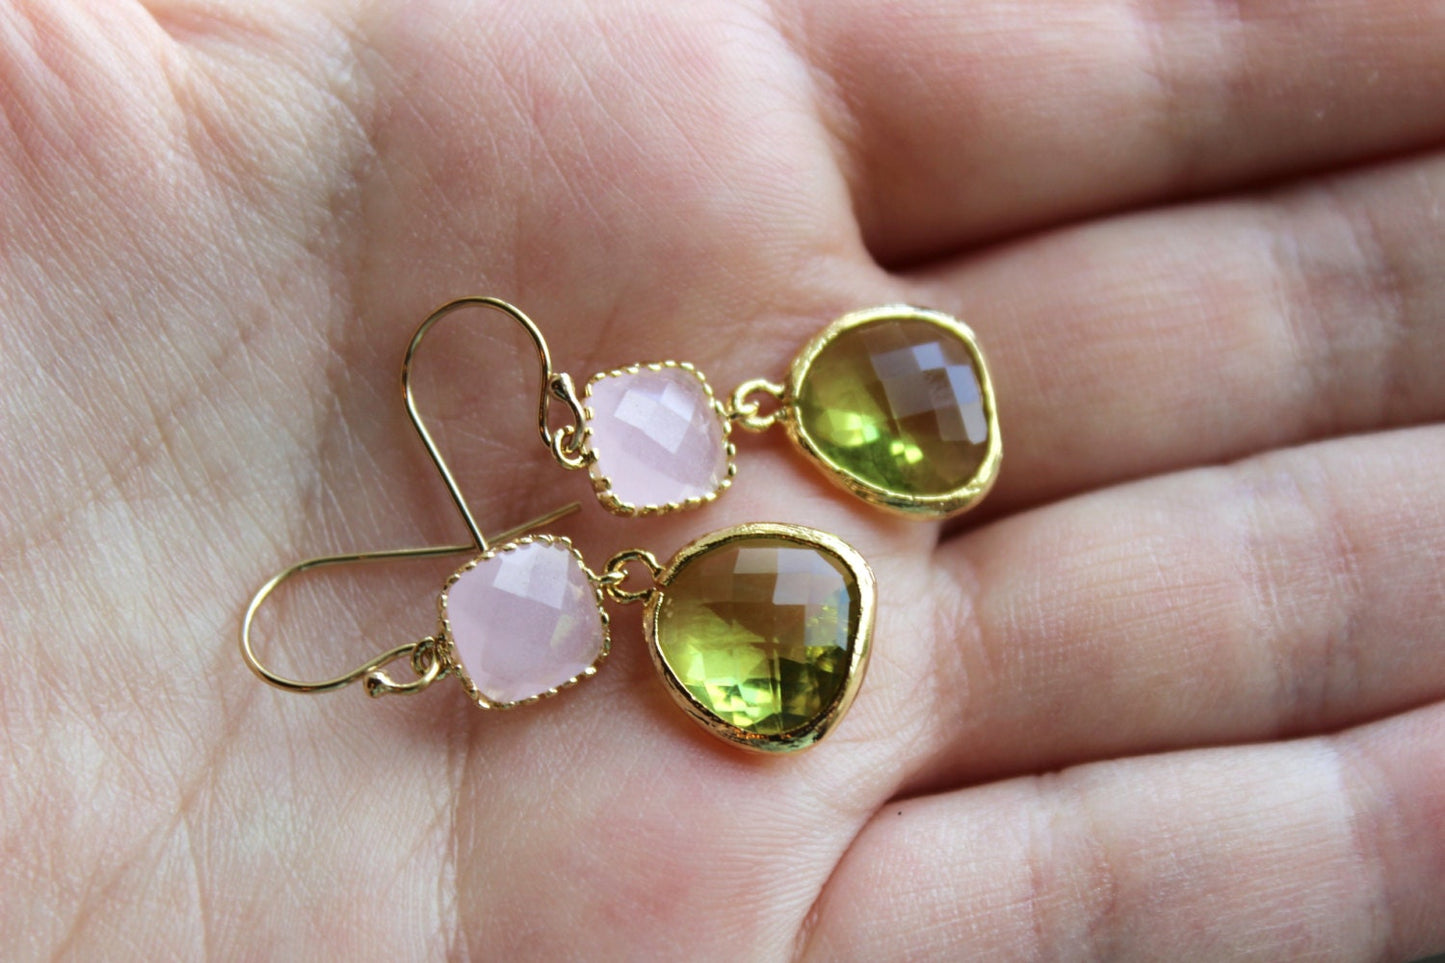 Peridot Earrings Green Pink Opal Gold Plated - Bridesmaid Earrings Wedding Apple Green Light Pink Bridesmaid Jewelry Gift - Gold Accessories